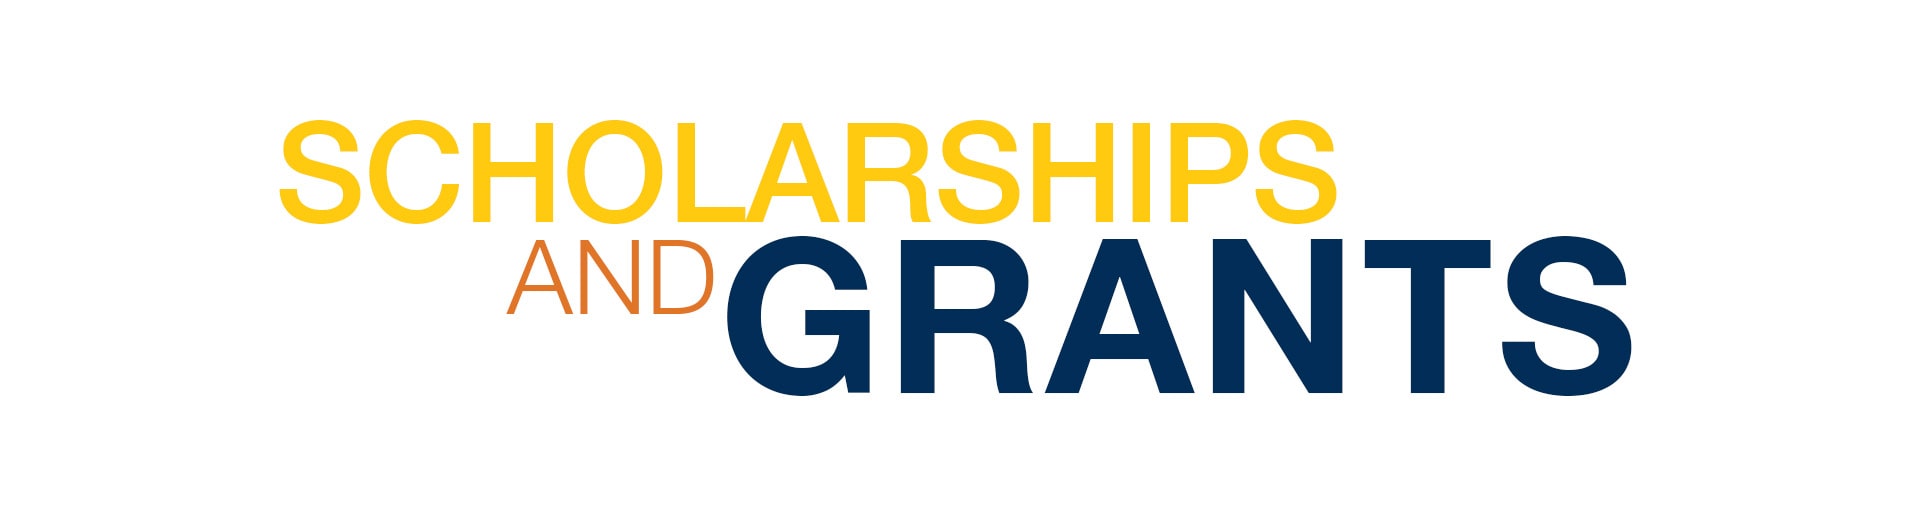 Scholarships and Grants